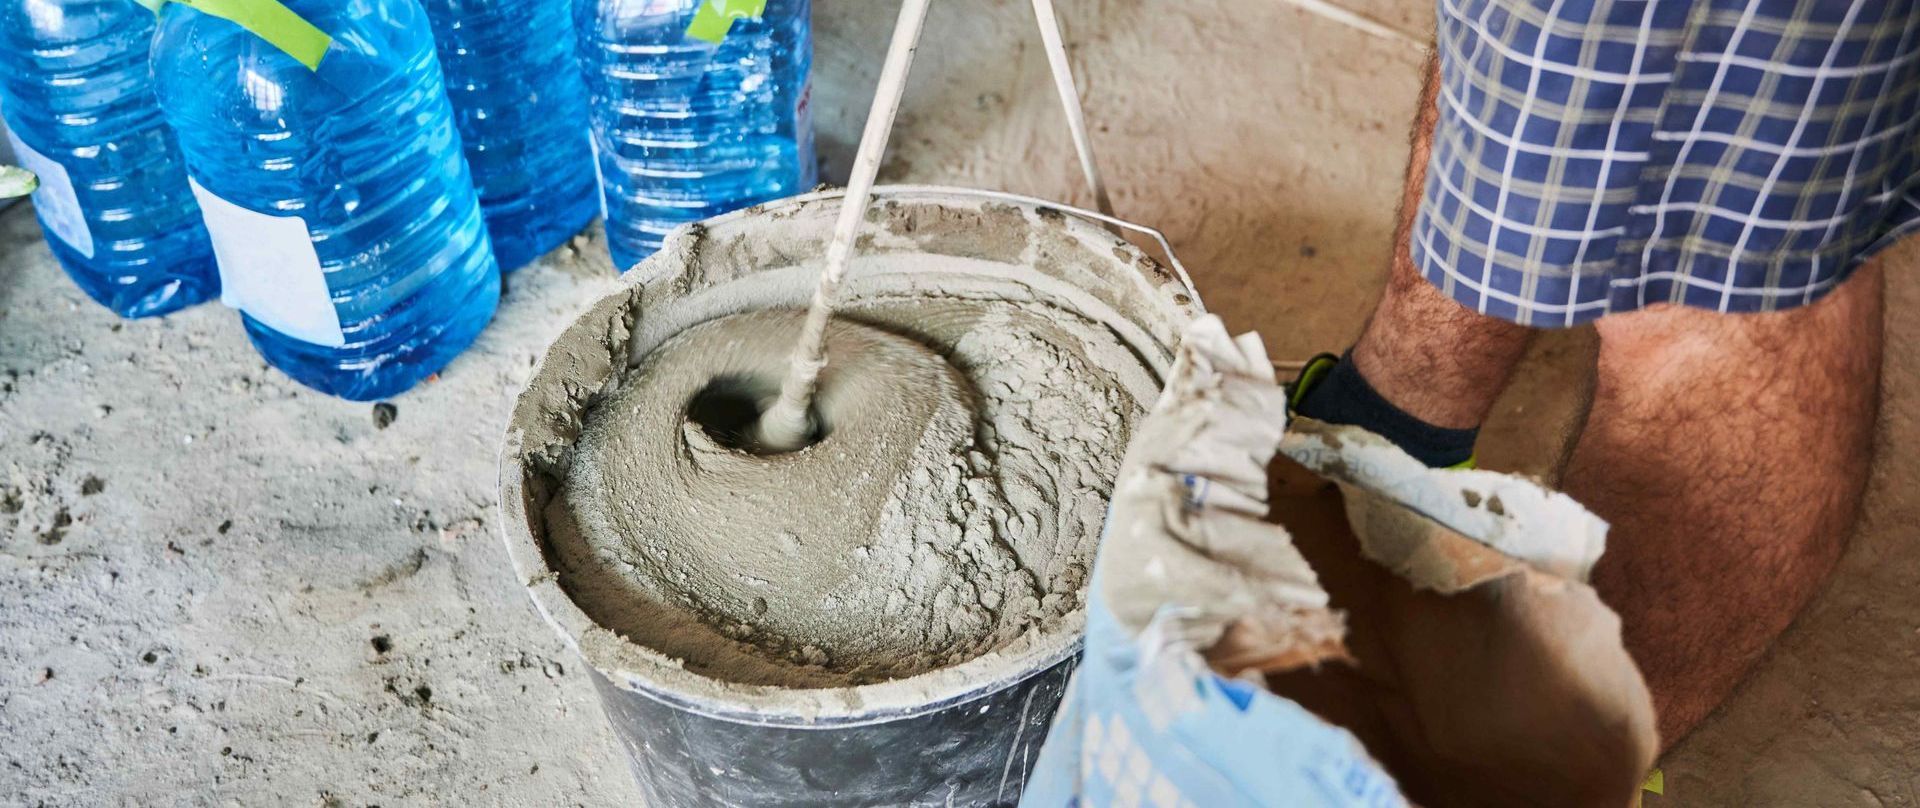 Homeowner Mixing Concrete For DIY Project